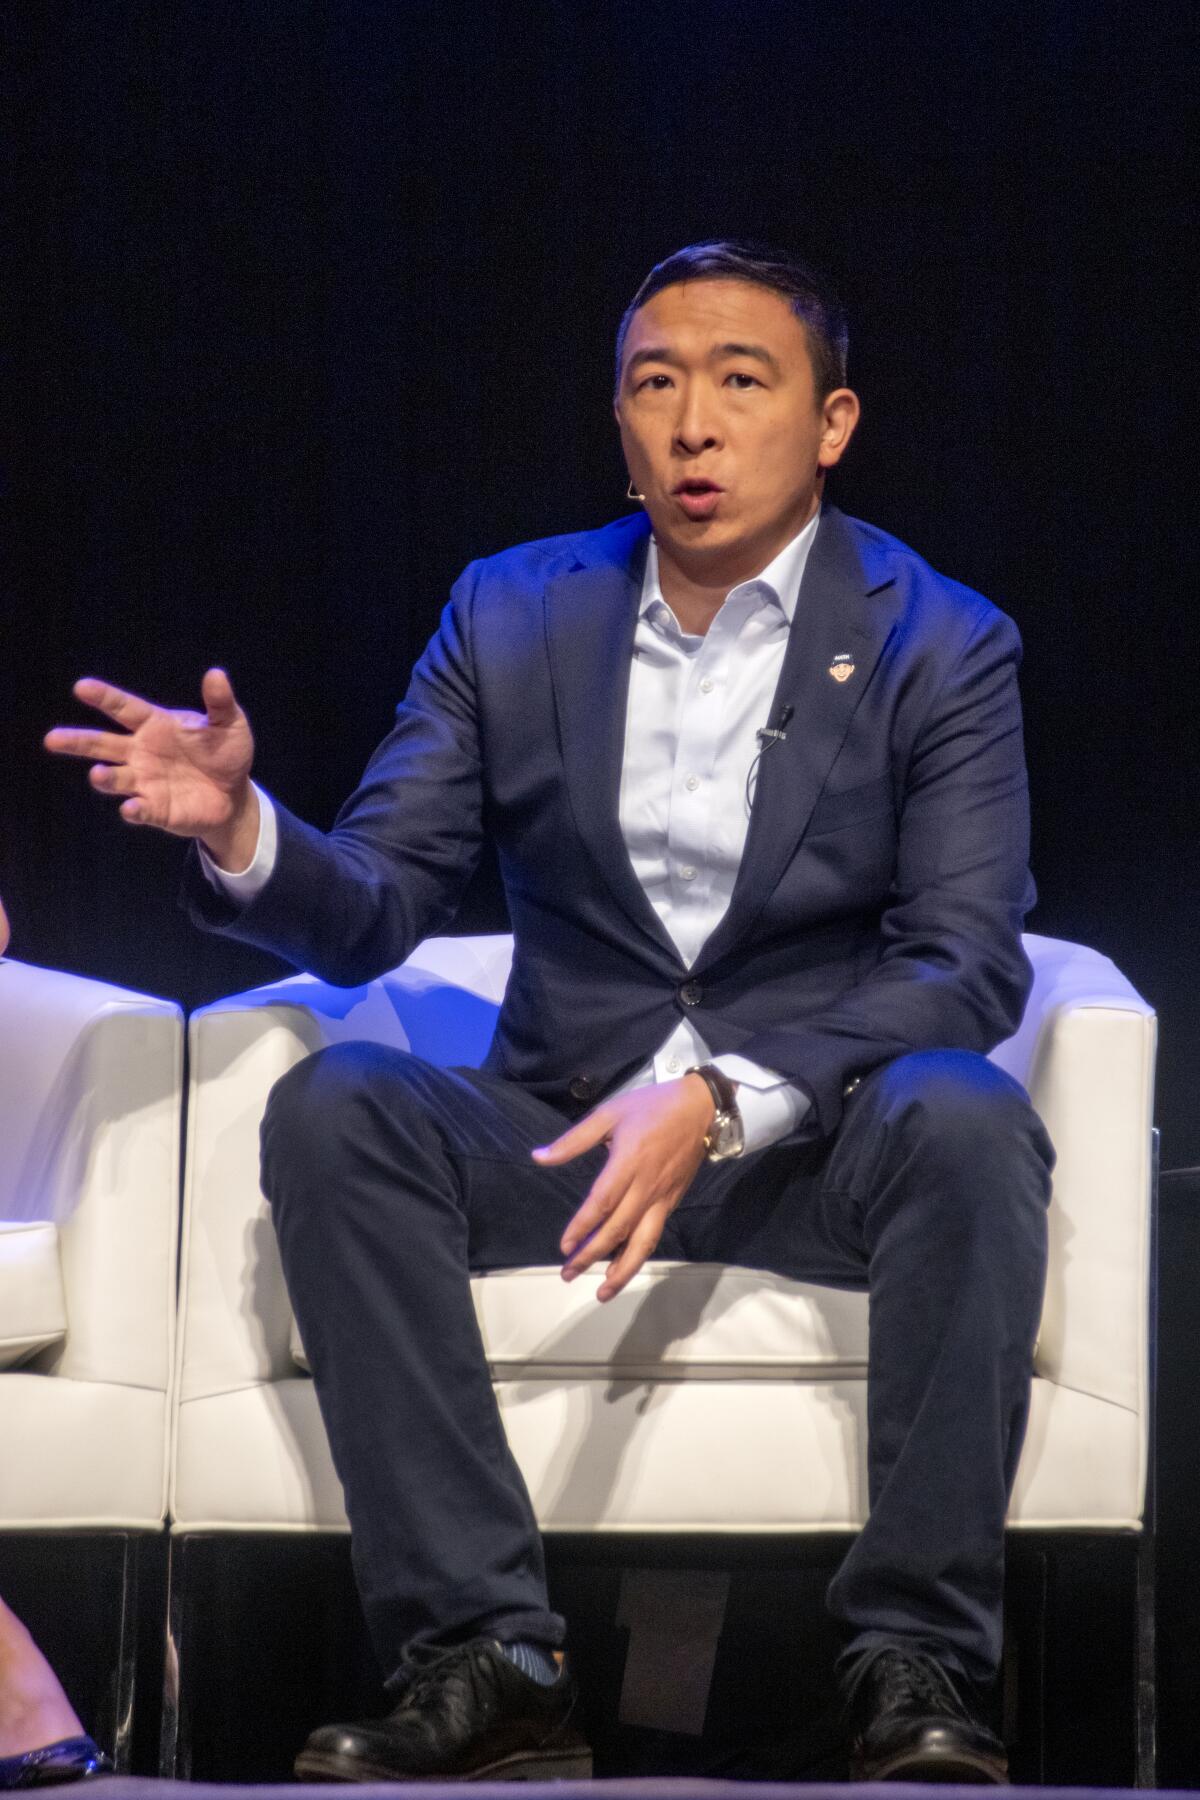 Candidate Andrew Yang speaks at Sunday's Democratic presidential forum at the Segerstrom Center for the Arts in Costa Mesa.